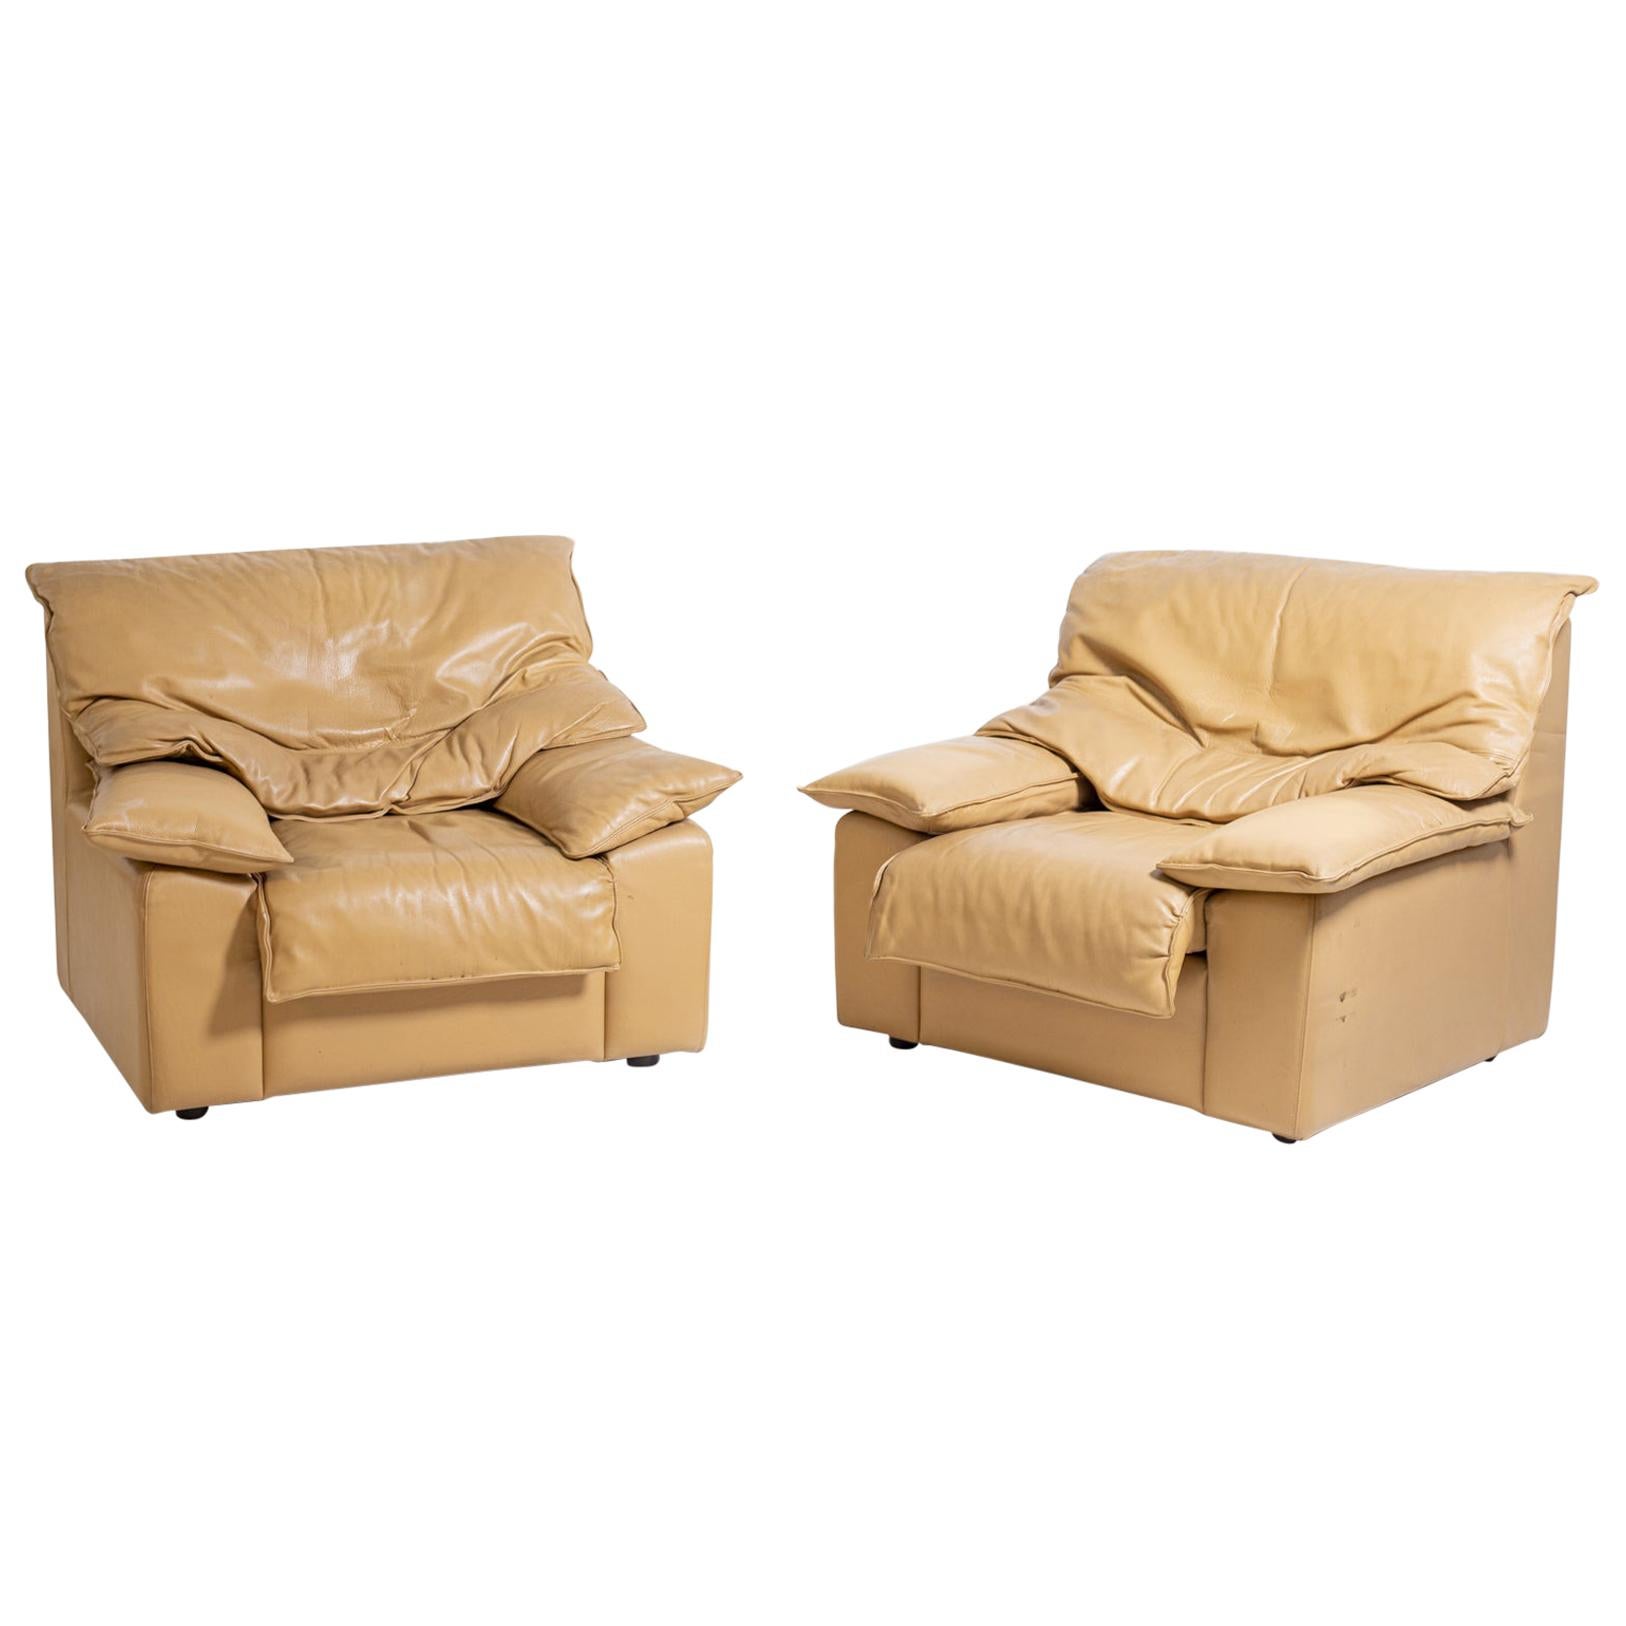 Pair of Italian Armchair in Camel Leather, 1970s For Sale